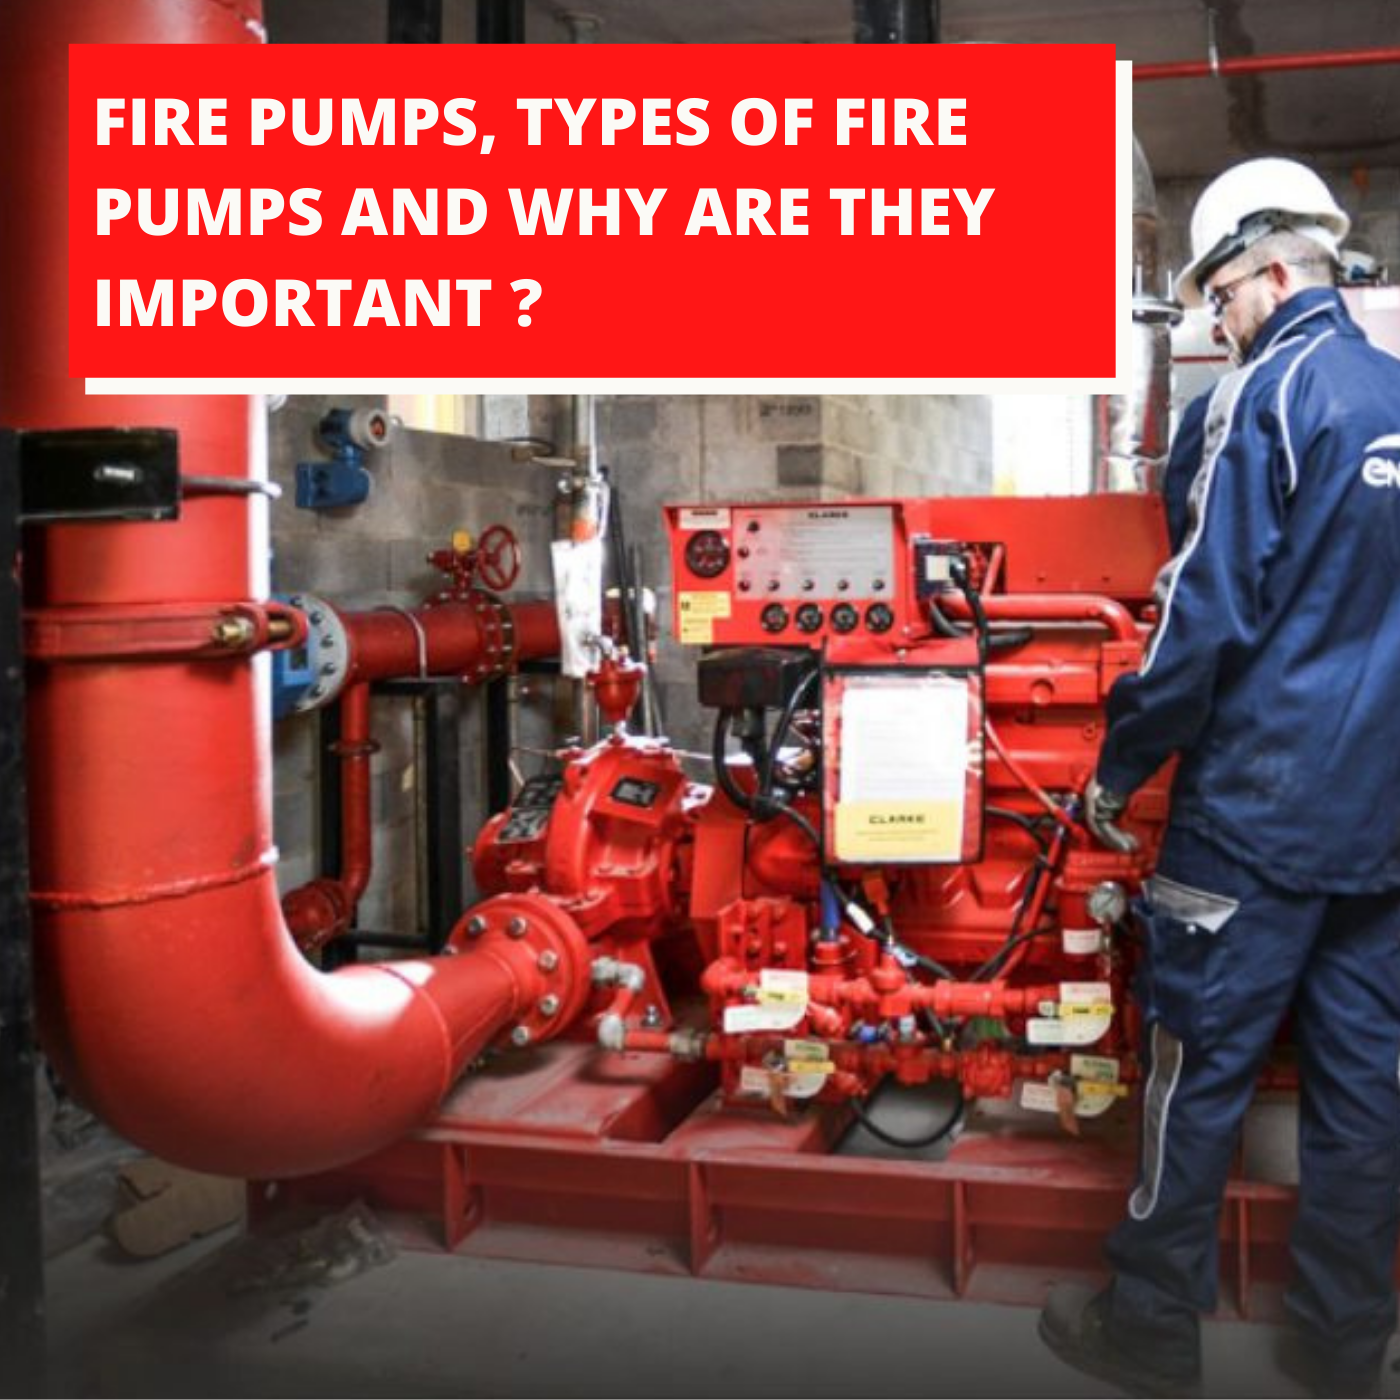 Fire pumps, Types of fire pumps and Why are they important ?